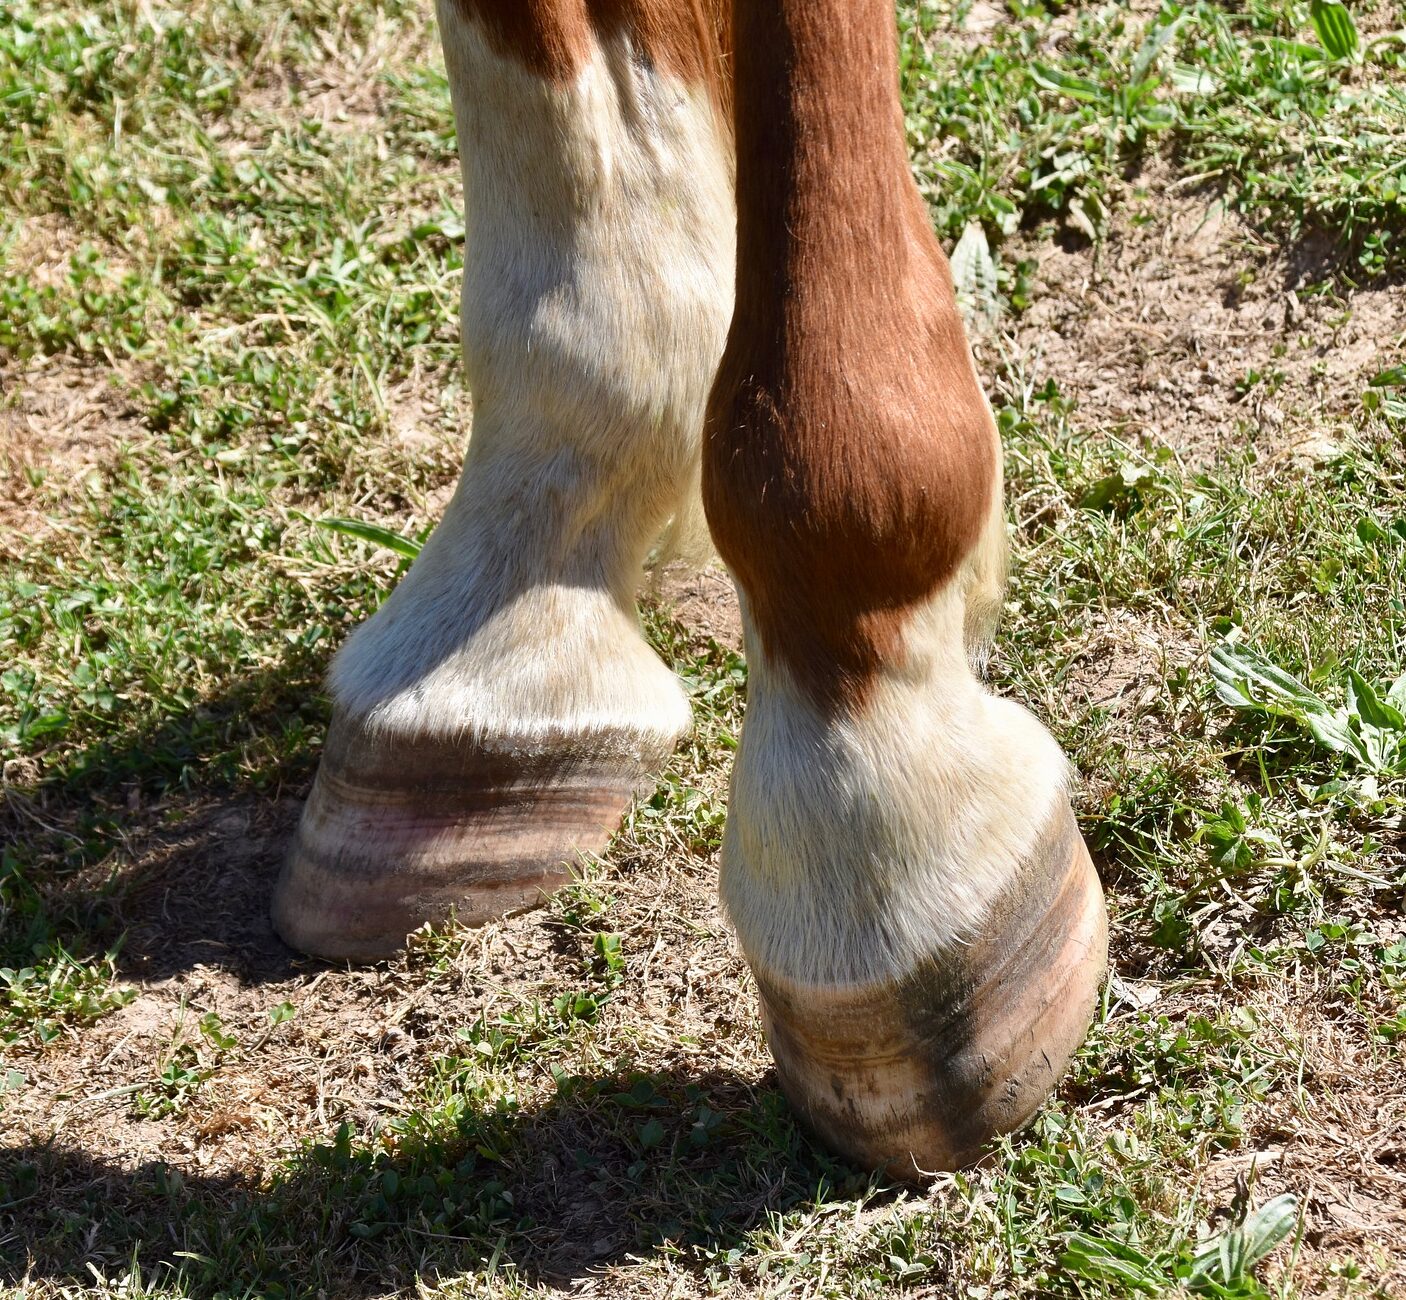 hooves of a horse g40460f088 1920 e1649251555877